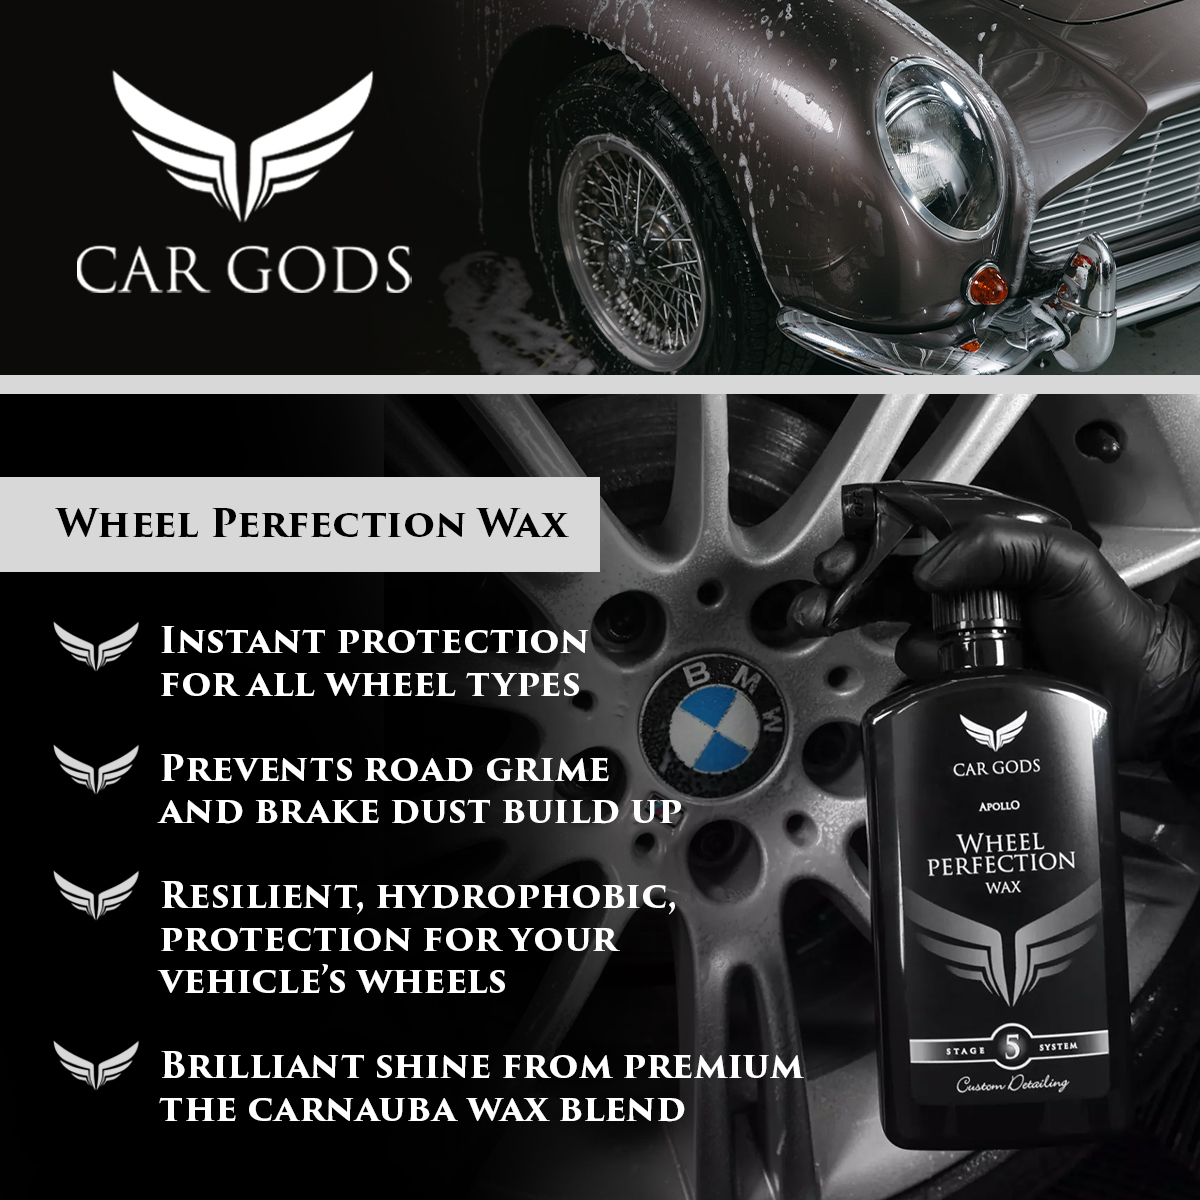 Car Gods Wheel Perfection Wax. Instant protection for all wheel types that prevents road grime and brake dust build up. Apply a resilient, hydrophobic, brilliant shine with the premium, protective carnauba wax.